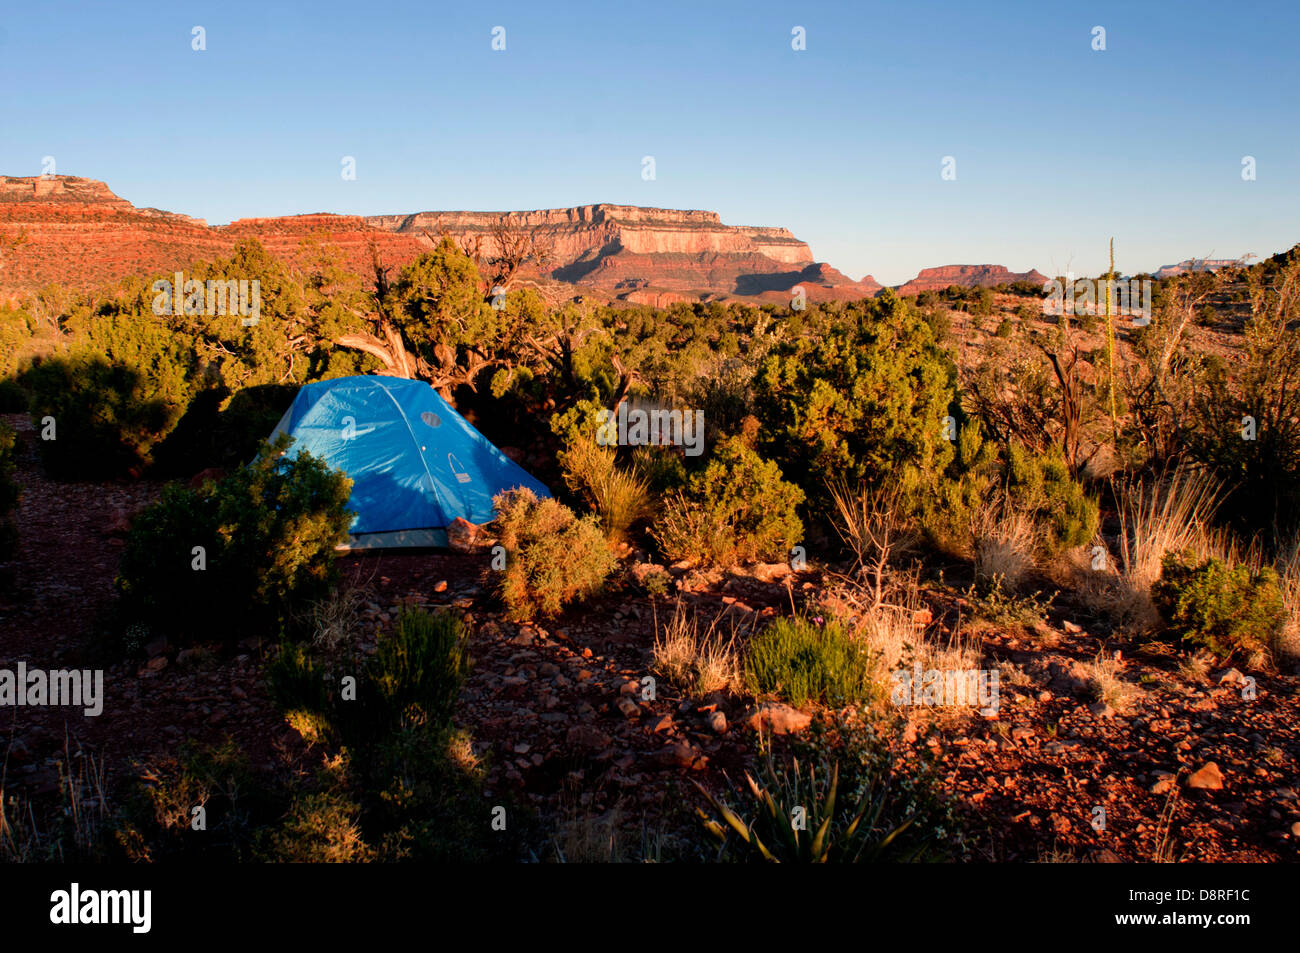 Tent in an approved camping area of Grand Canyon National Park, Arizona, USA. Stock Photo